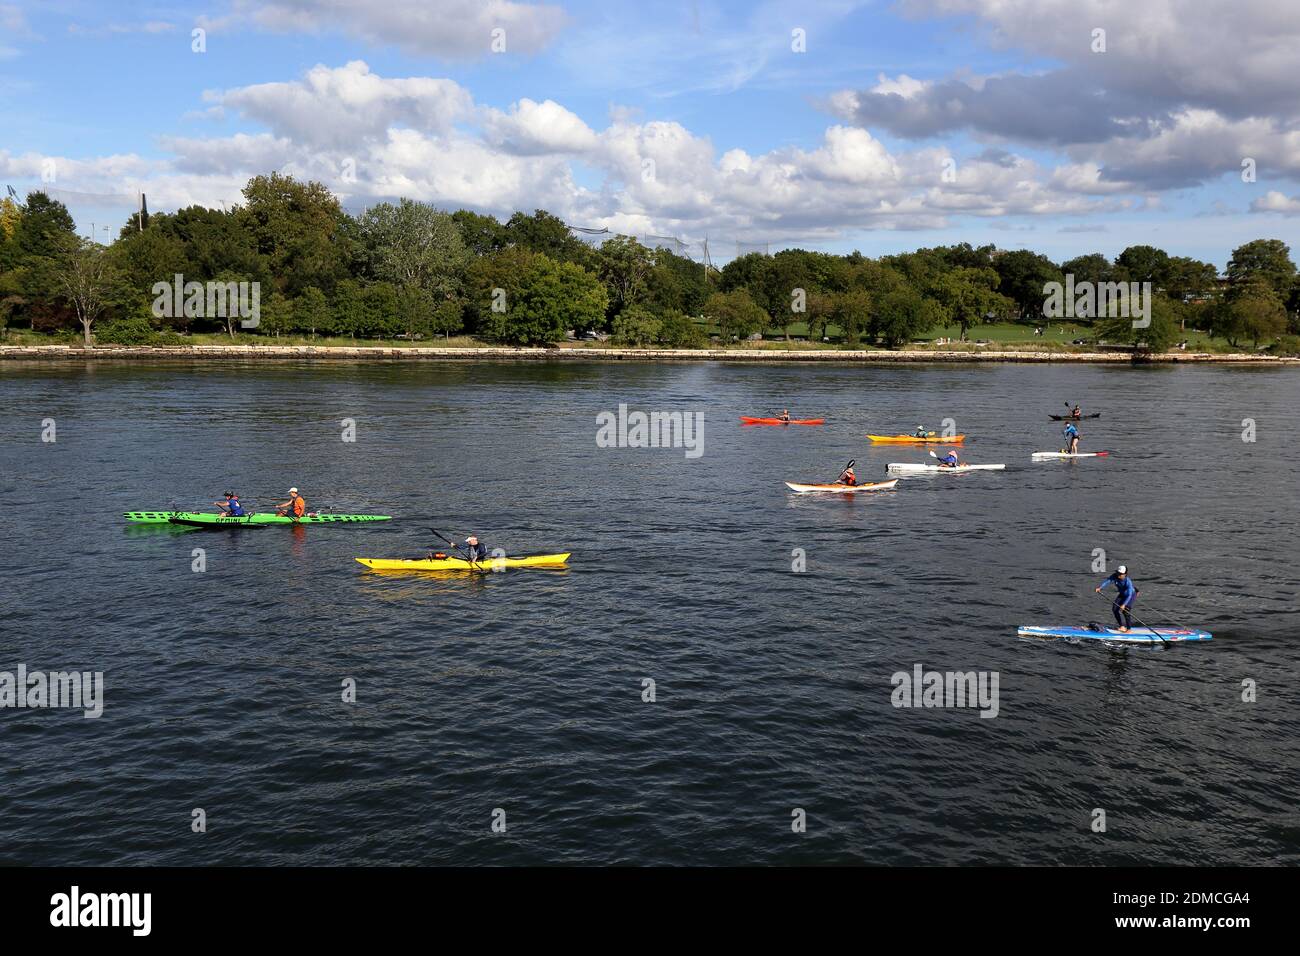 Kayakers, paddlers, canoers on the Harlem River between Manhattan and Randalls Island in New York, NY. Stock Photo